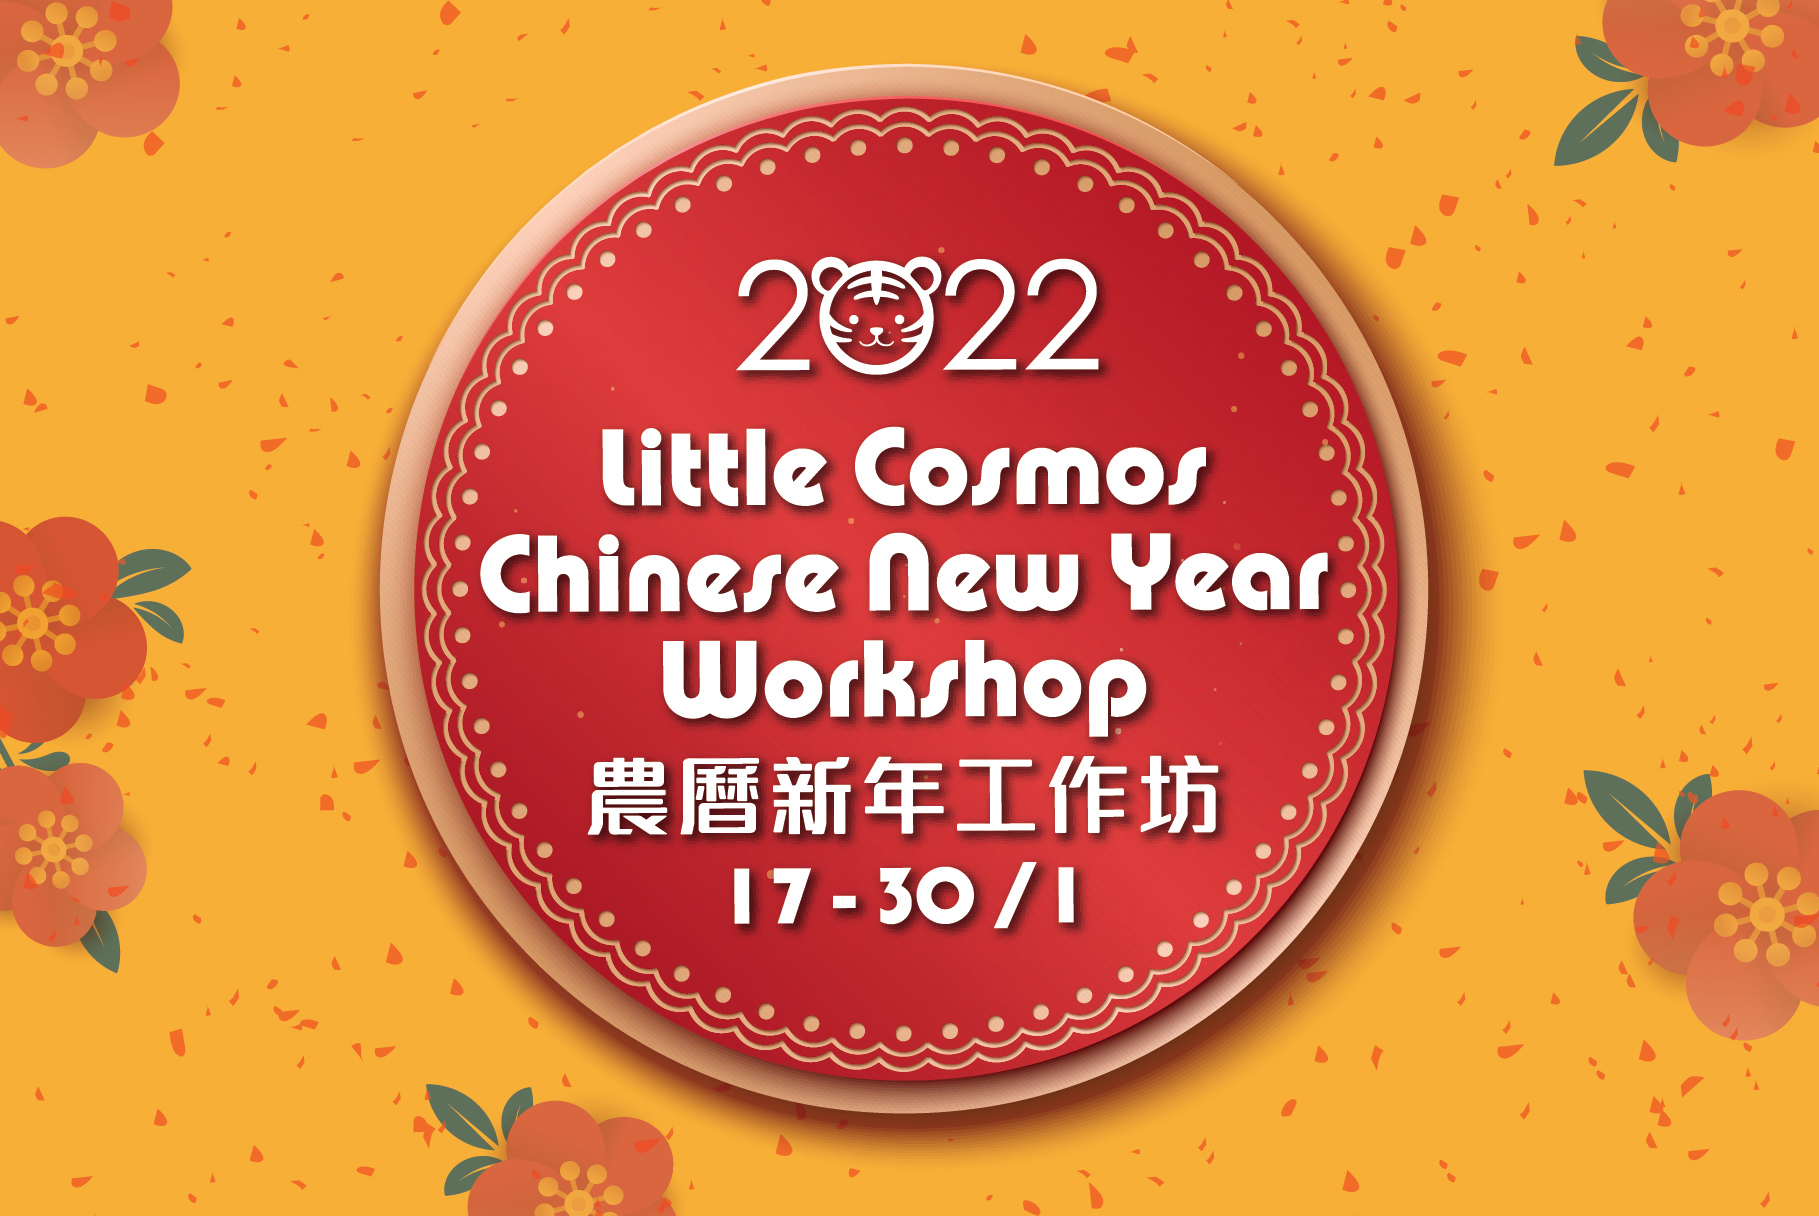 【20220112】Little Cosmos Chinese New Year Workshop 2022